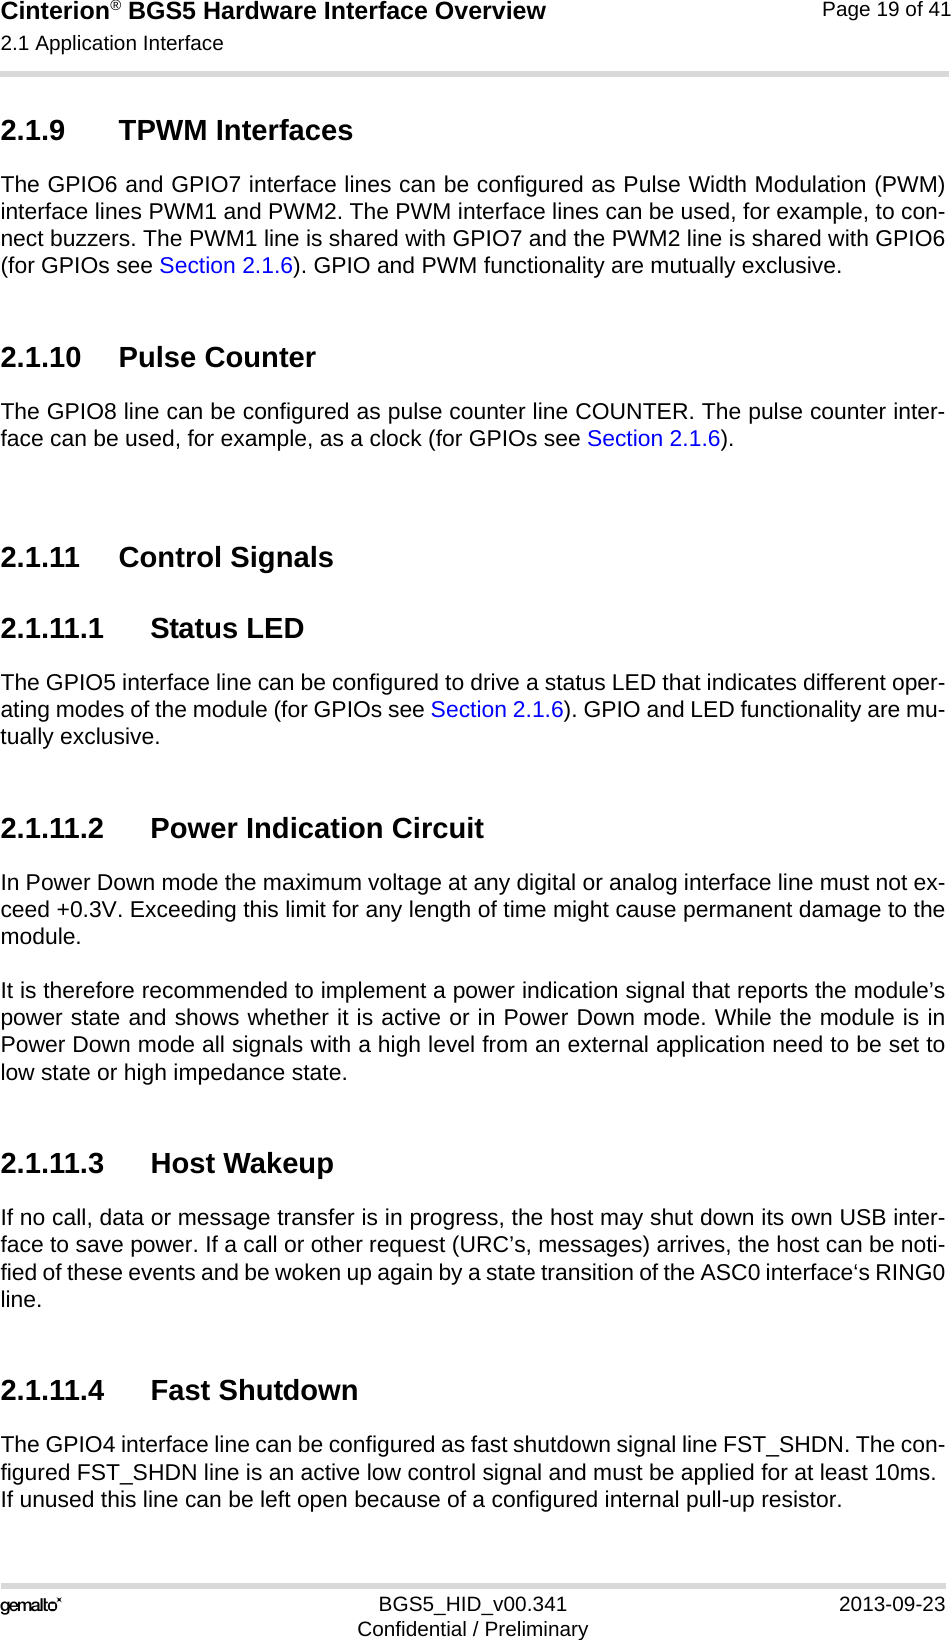 Cinterion® BGS5 Hardware Interface Overview2.1 Application Interface23BGS5_HID_v00.341 2013-09-23Confidential / PreliminaryPage 19 of 412.1.9 TPWM InterfacesThe GPIO6 and GPIO7 interface lines can be configured as Pulse Width Modulation (PWM)interface lines PWM1 and PWM2. The PWM interface lines can be used, for example, to con-nect buzzers. The PWM1 line is shared with GPIO7 and the PWM2 line is shared with GPIO6(for GPIOs see Section 2.1.6). GPIO and PWM functionality are mutually exclusive.2.1.10 Pulse CounterThe GPIO8 line can be configured as pulse counter line COUNTER. The pulse counter inter-face can be used, for example, as a clock (for GPIOs see Section 2.1.6).2.1.11 Control Signals2.1.11.1 Status LEDThe GPIO5 interface line can be configured to drive a status LED that indicates different oper-ating modes of the module (for GPIOs see Section 2.1.6). GPIO and LED functionality are mu-tually exclusive.2.1.11.2 Power Indication CircuitIn Power Down mode the maximum voltage at any digital or analog interface line must not ex-ceed +0.3V. Exceeding this limit for any length of time might cause permanent damage to themodule. It is therefore recommended to implement a power indication signal that reports the module’spower state and shows whether it is active or in Power Down mode. While the module is inPower Down mode all signals with a high level from an external application need to be set tolow state or high impedance state. 2.1.11.3 Host WakeupIf no call, data or message transfer is in progress, the host may shut down its own USB inter-face to save power. If a call or other request (URC’s, messages) arrives, the host can be noti-fied of these events and be woken up again by a state transition of the ASC0 interface‘s RING0line.2.1.11.4 Fast ShutdownThe GPIO4 interface line can be configured as fast shutdown signal line FST_SHDN. The con-figured FST_SHDN line is an active low control signal and must be applied for at least 10ms. If unused this line can be left open because of a configured internal pull-up resistor. 